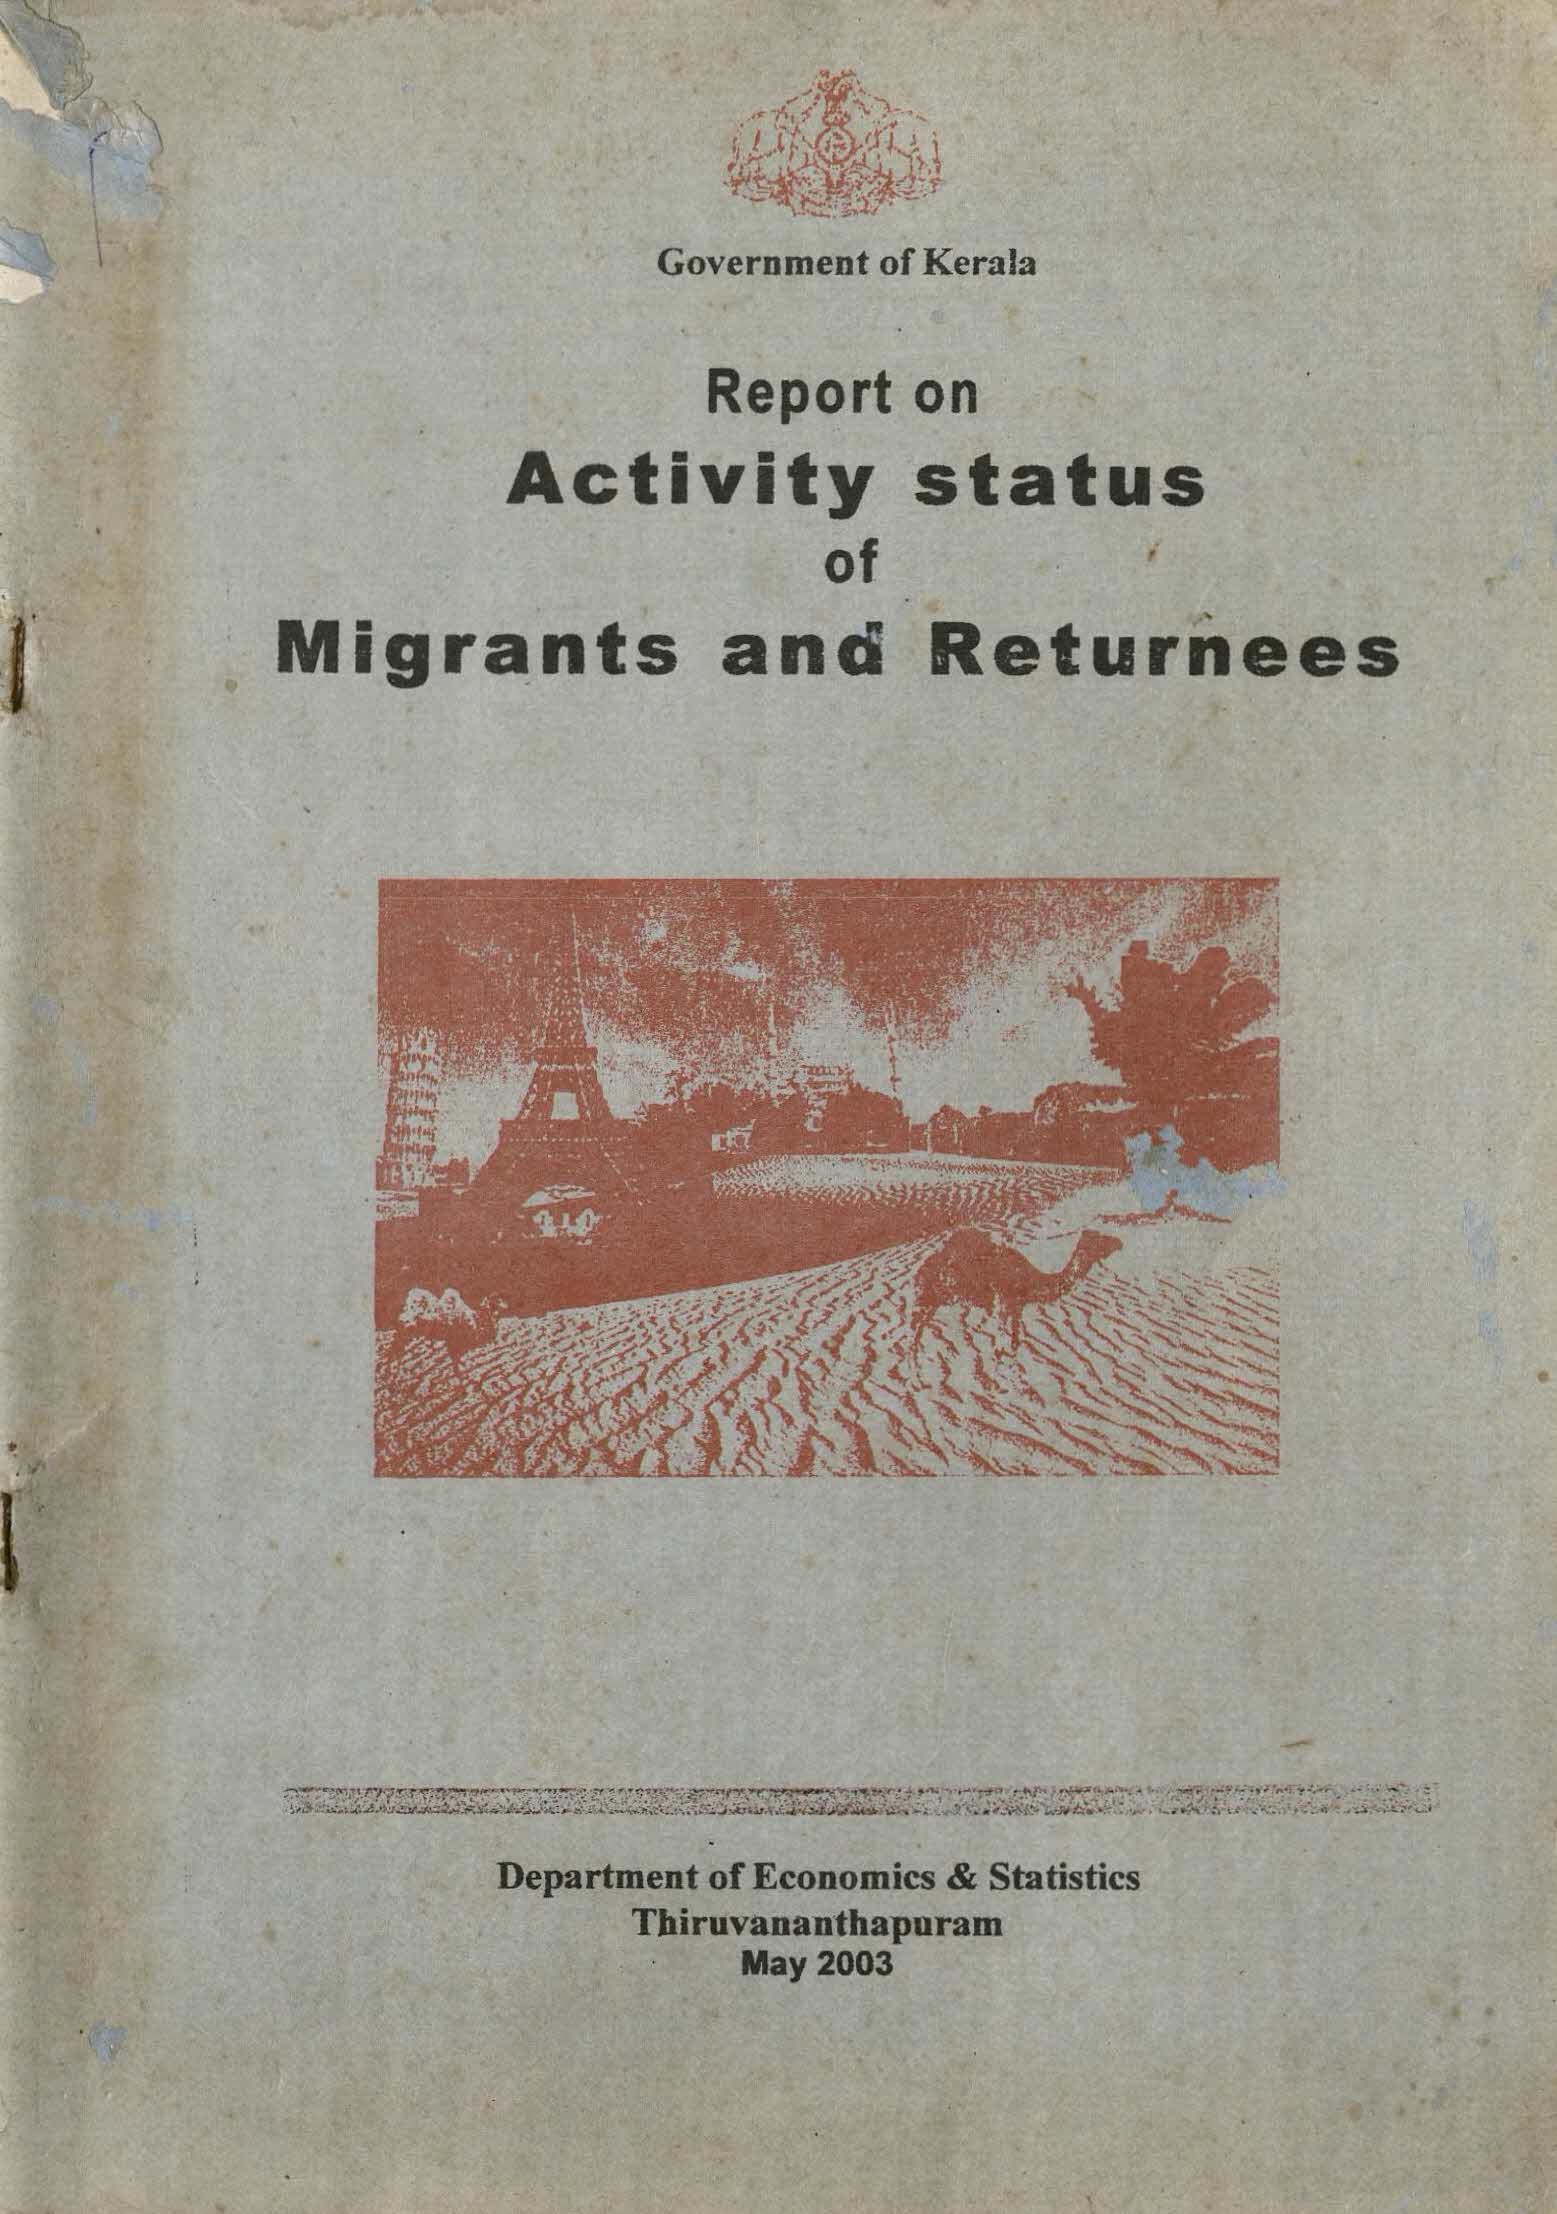 REPORT ON ACTIVITY STATUS OF MIGRANTS AND RETURNEES